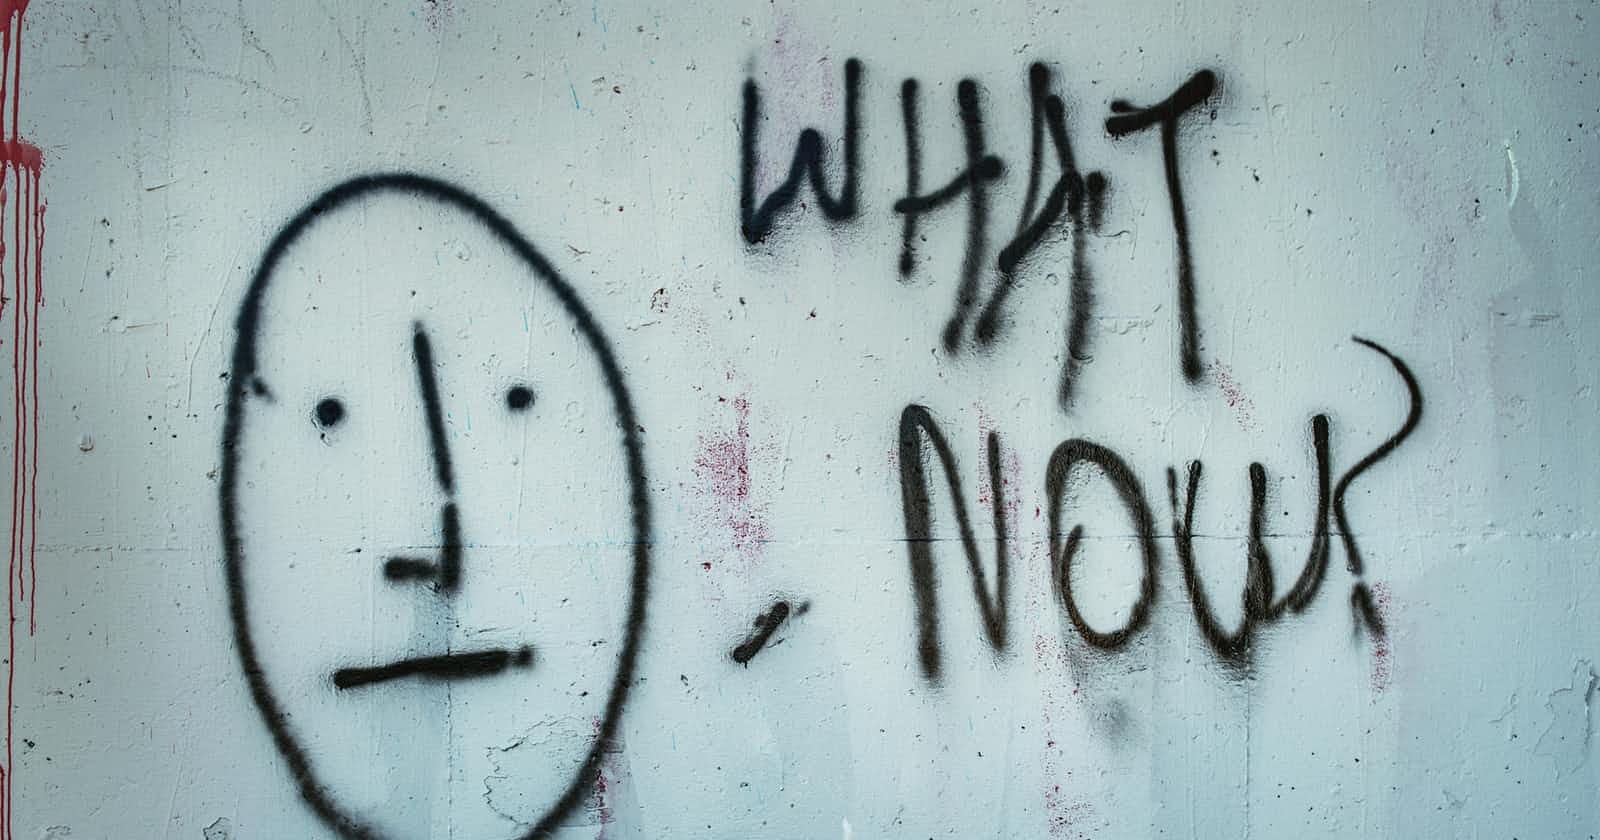 WHAT NOW? - (Issue 1) (10 Jun 22)